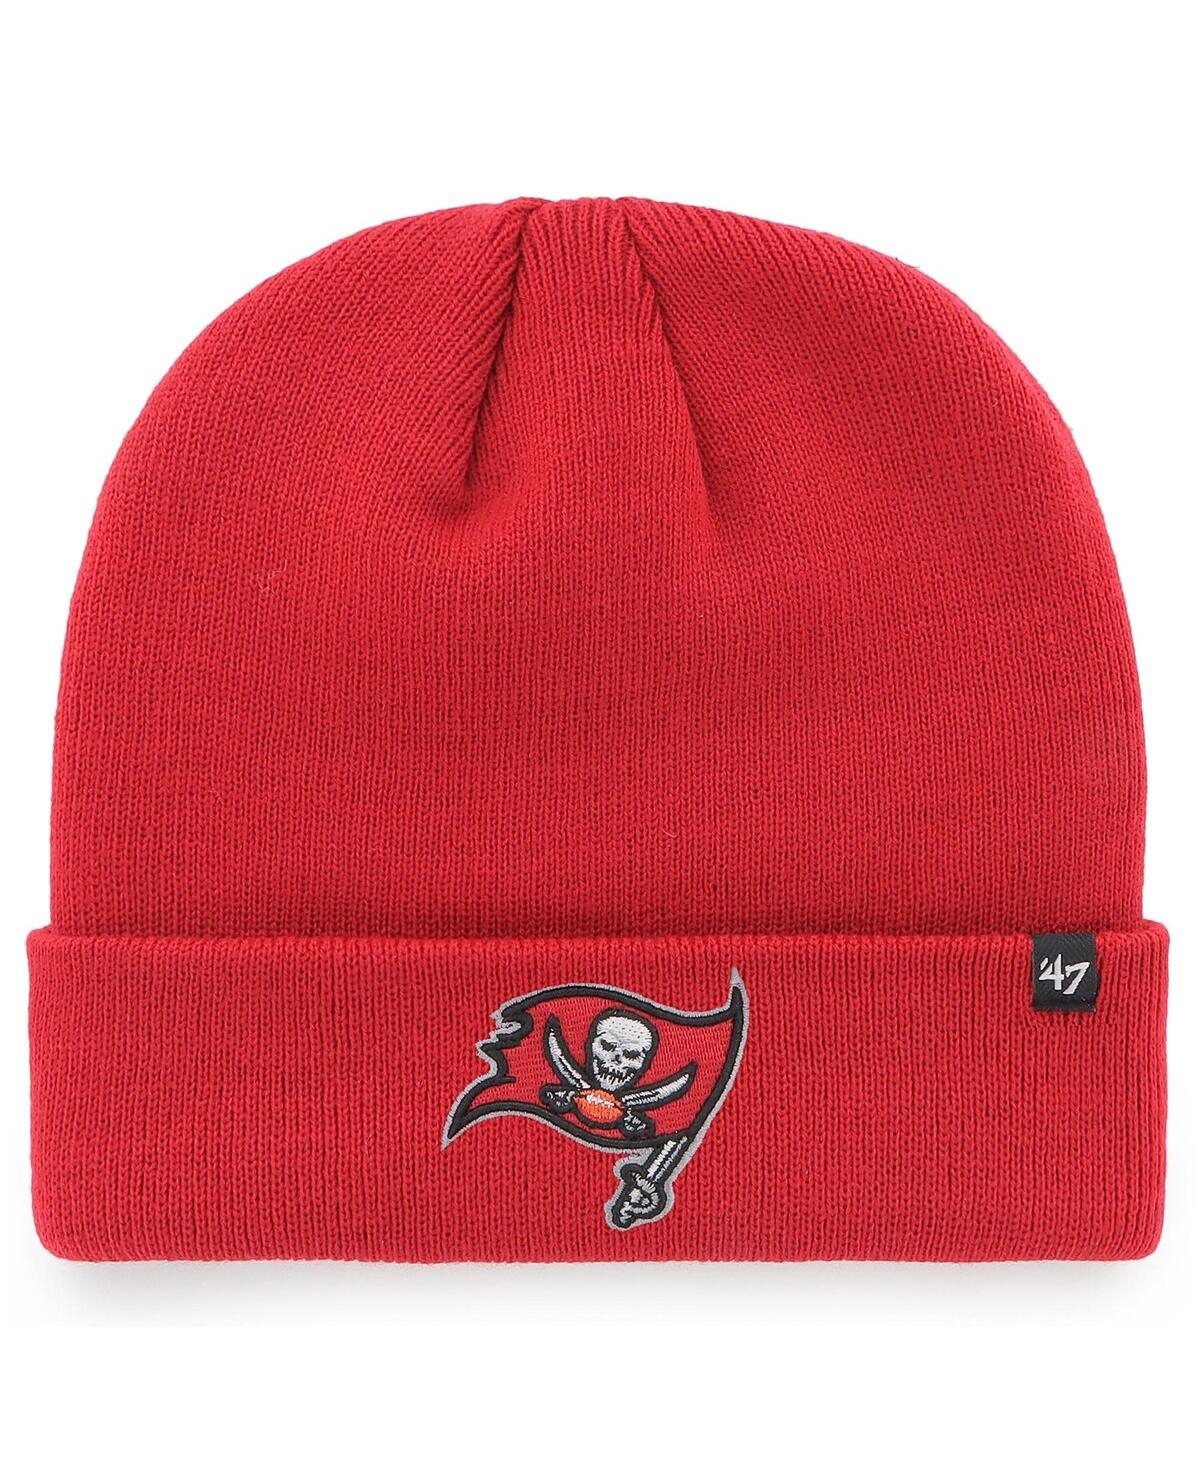 Shop 47 Brand Men's Red Tampa Bay Buccaneers Secondary Basic Cuffed Knit Hat